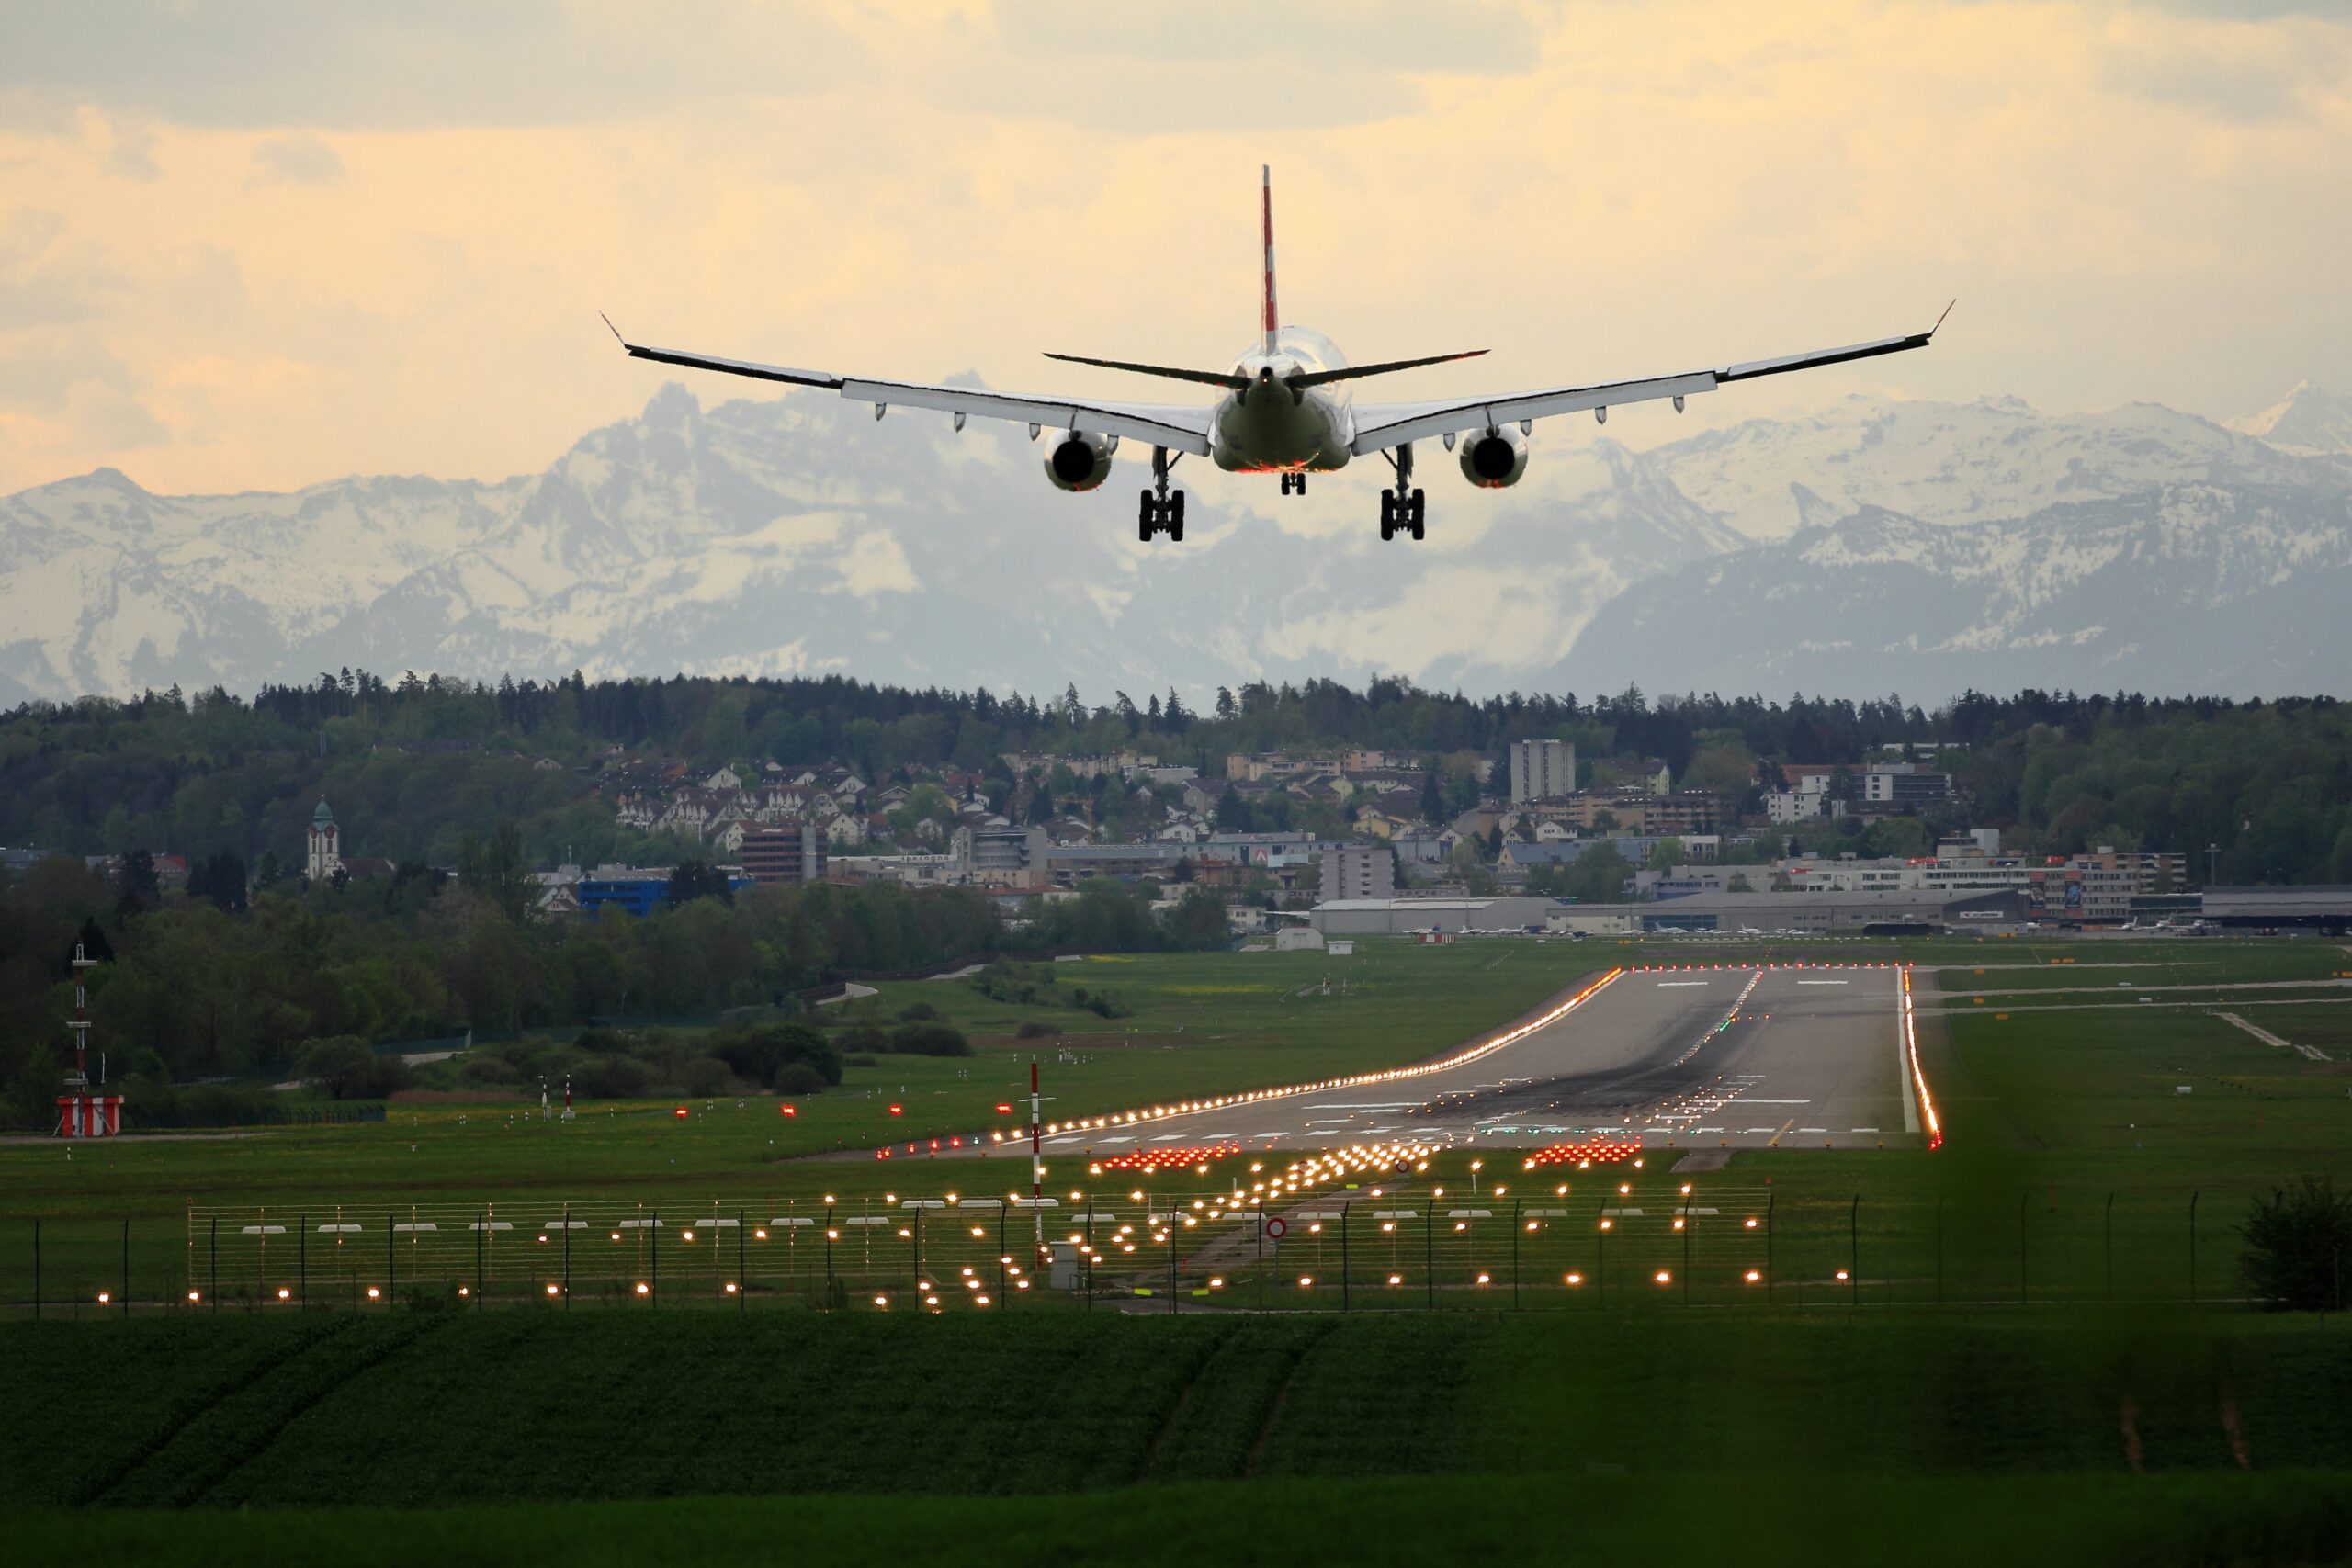 A white airplane preparing for landing on a landing strip with bright lights with mountains in the background.